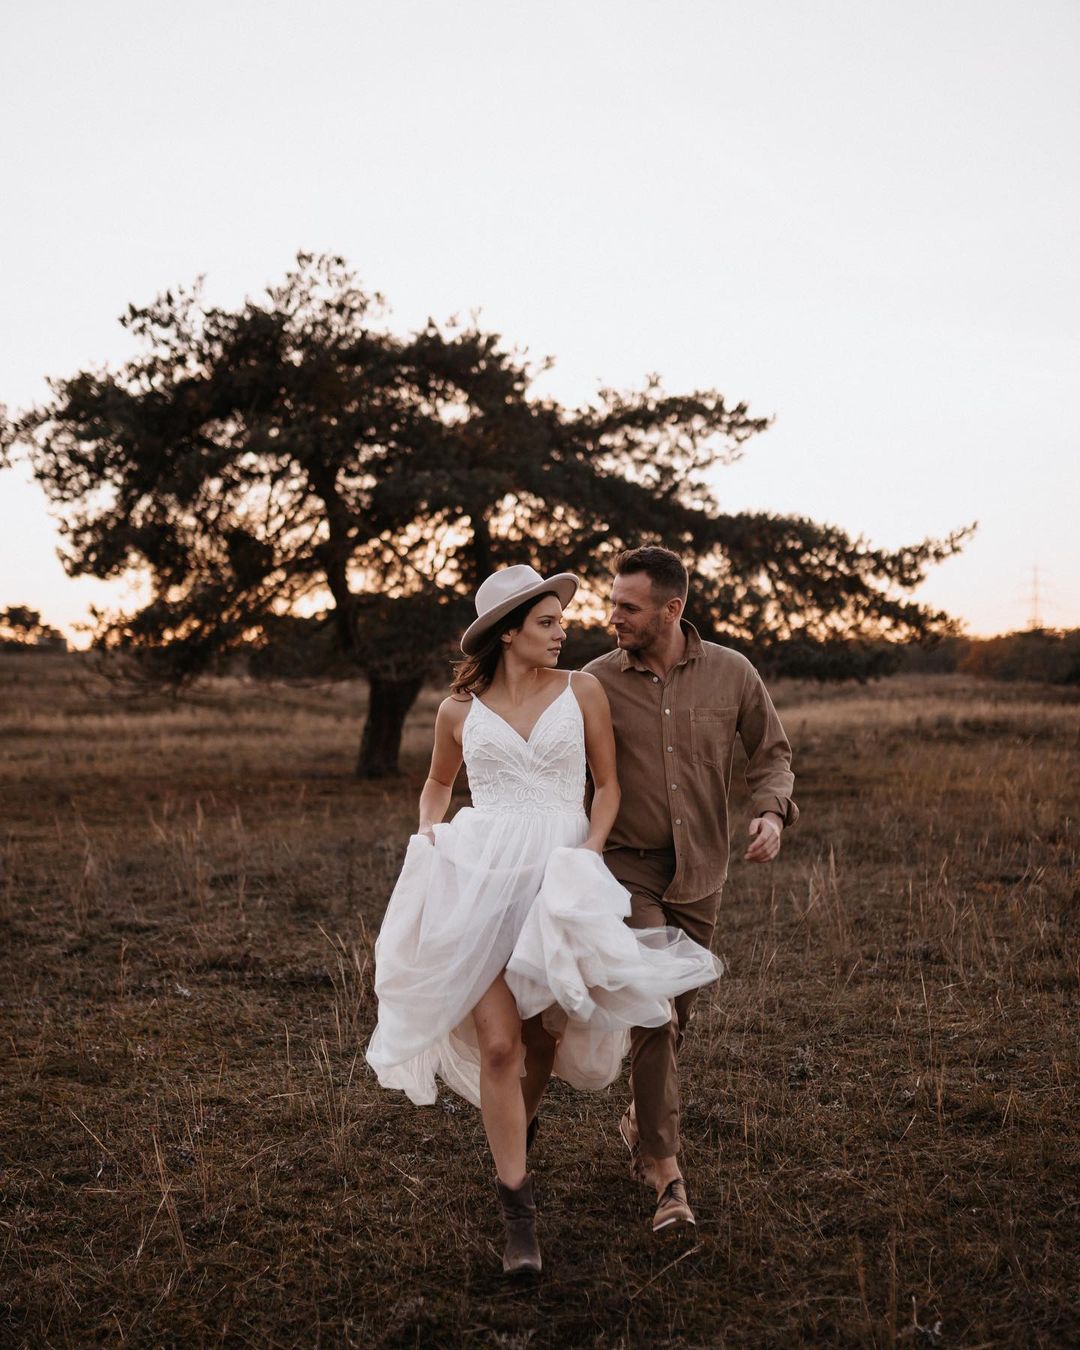 split wedding dresses to wear with cowboy boots